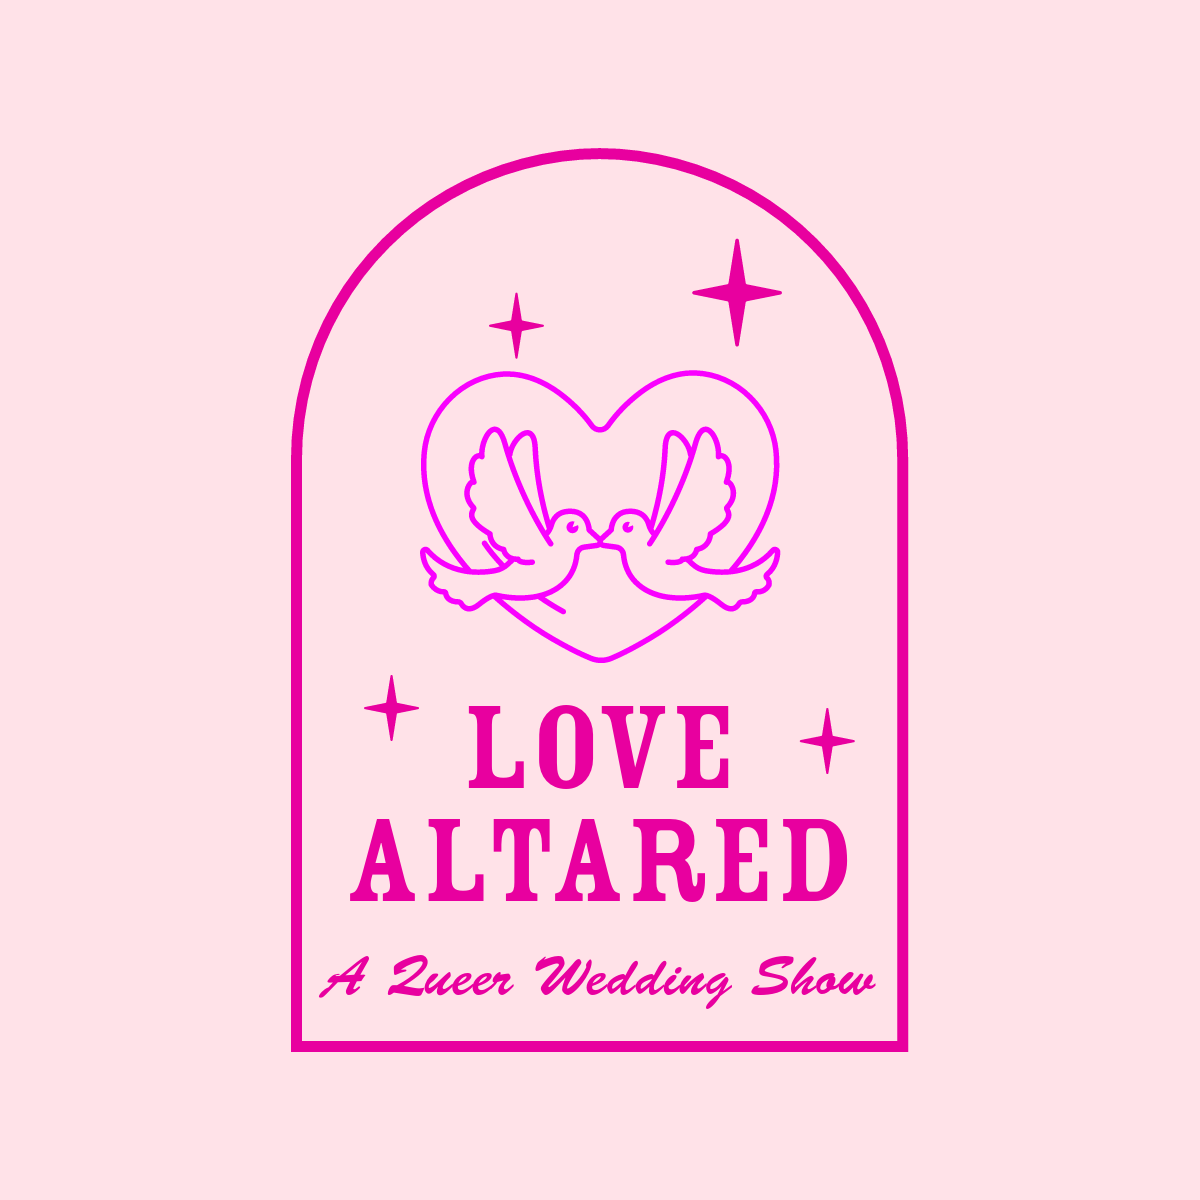 Love Altared | A Queer Wedding Show